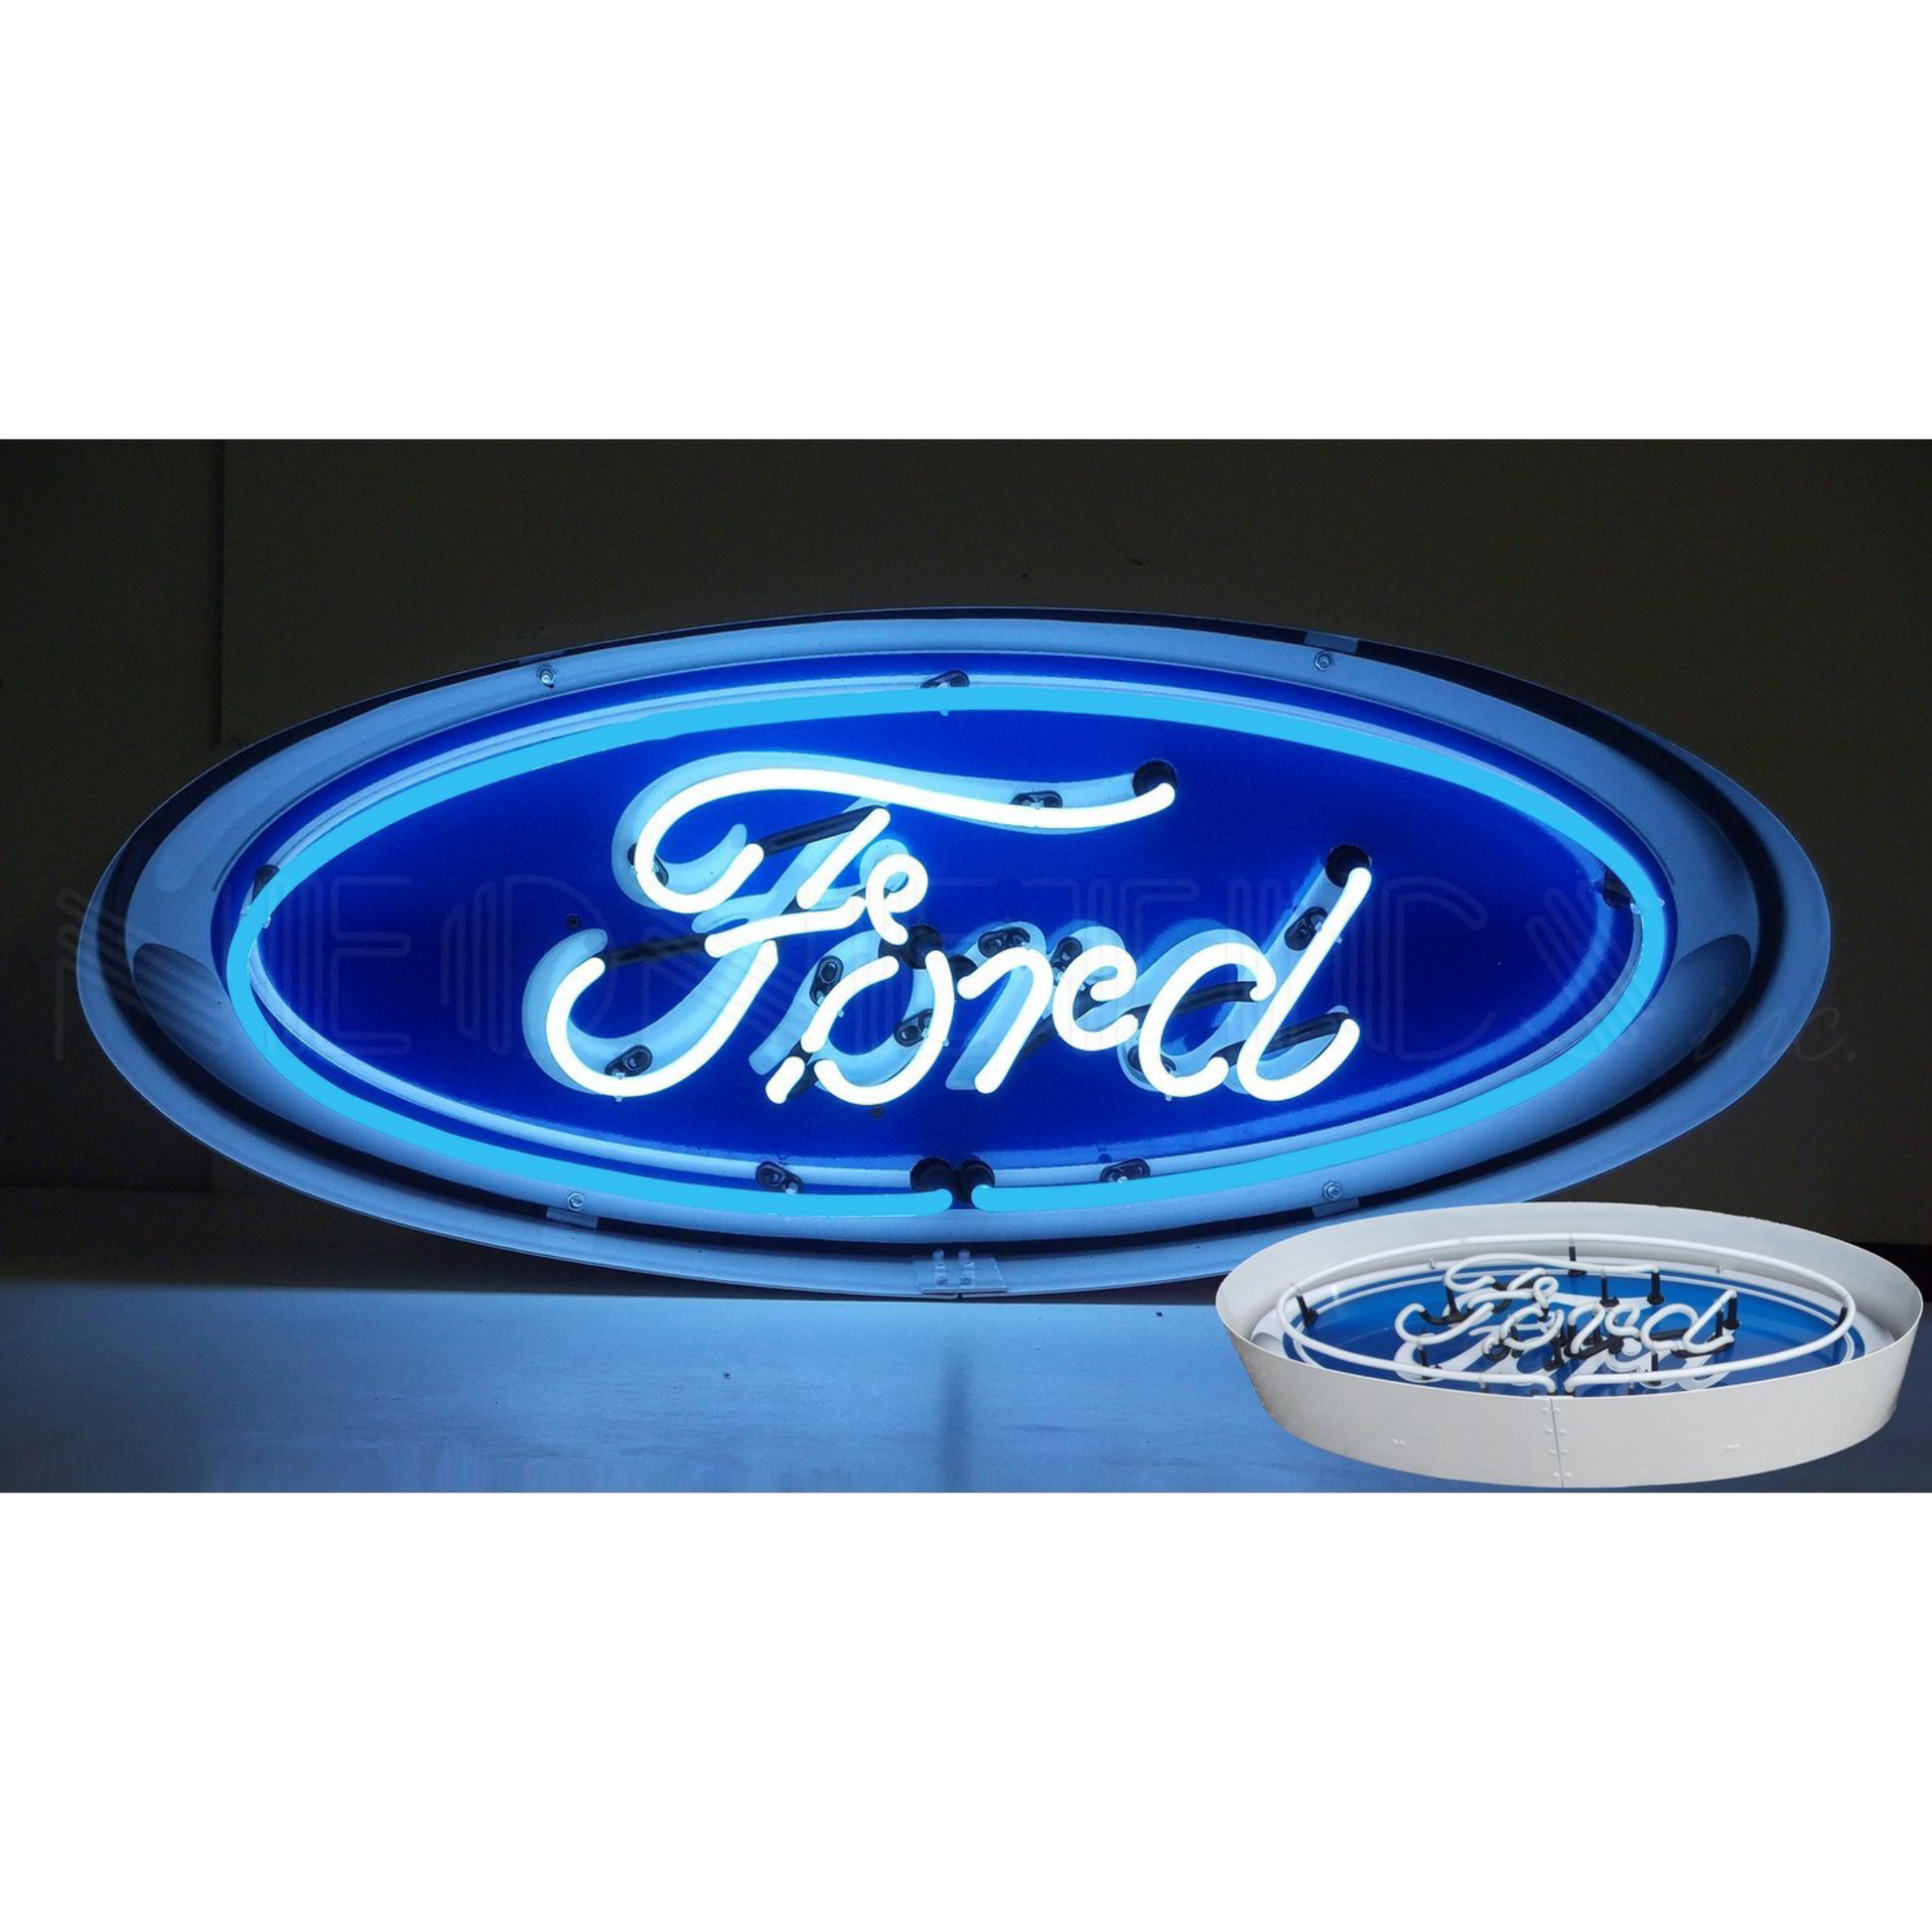 Ford Oval Neon Sign in a Steel Can, 30 inches wide by 12 inches high, showcasing the classic Ford logo in neon lights